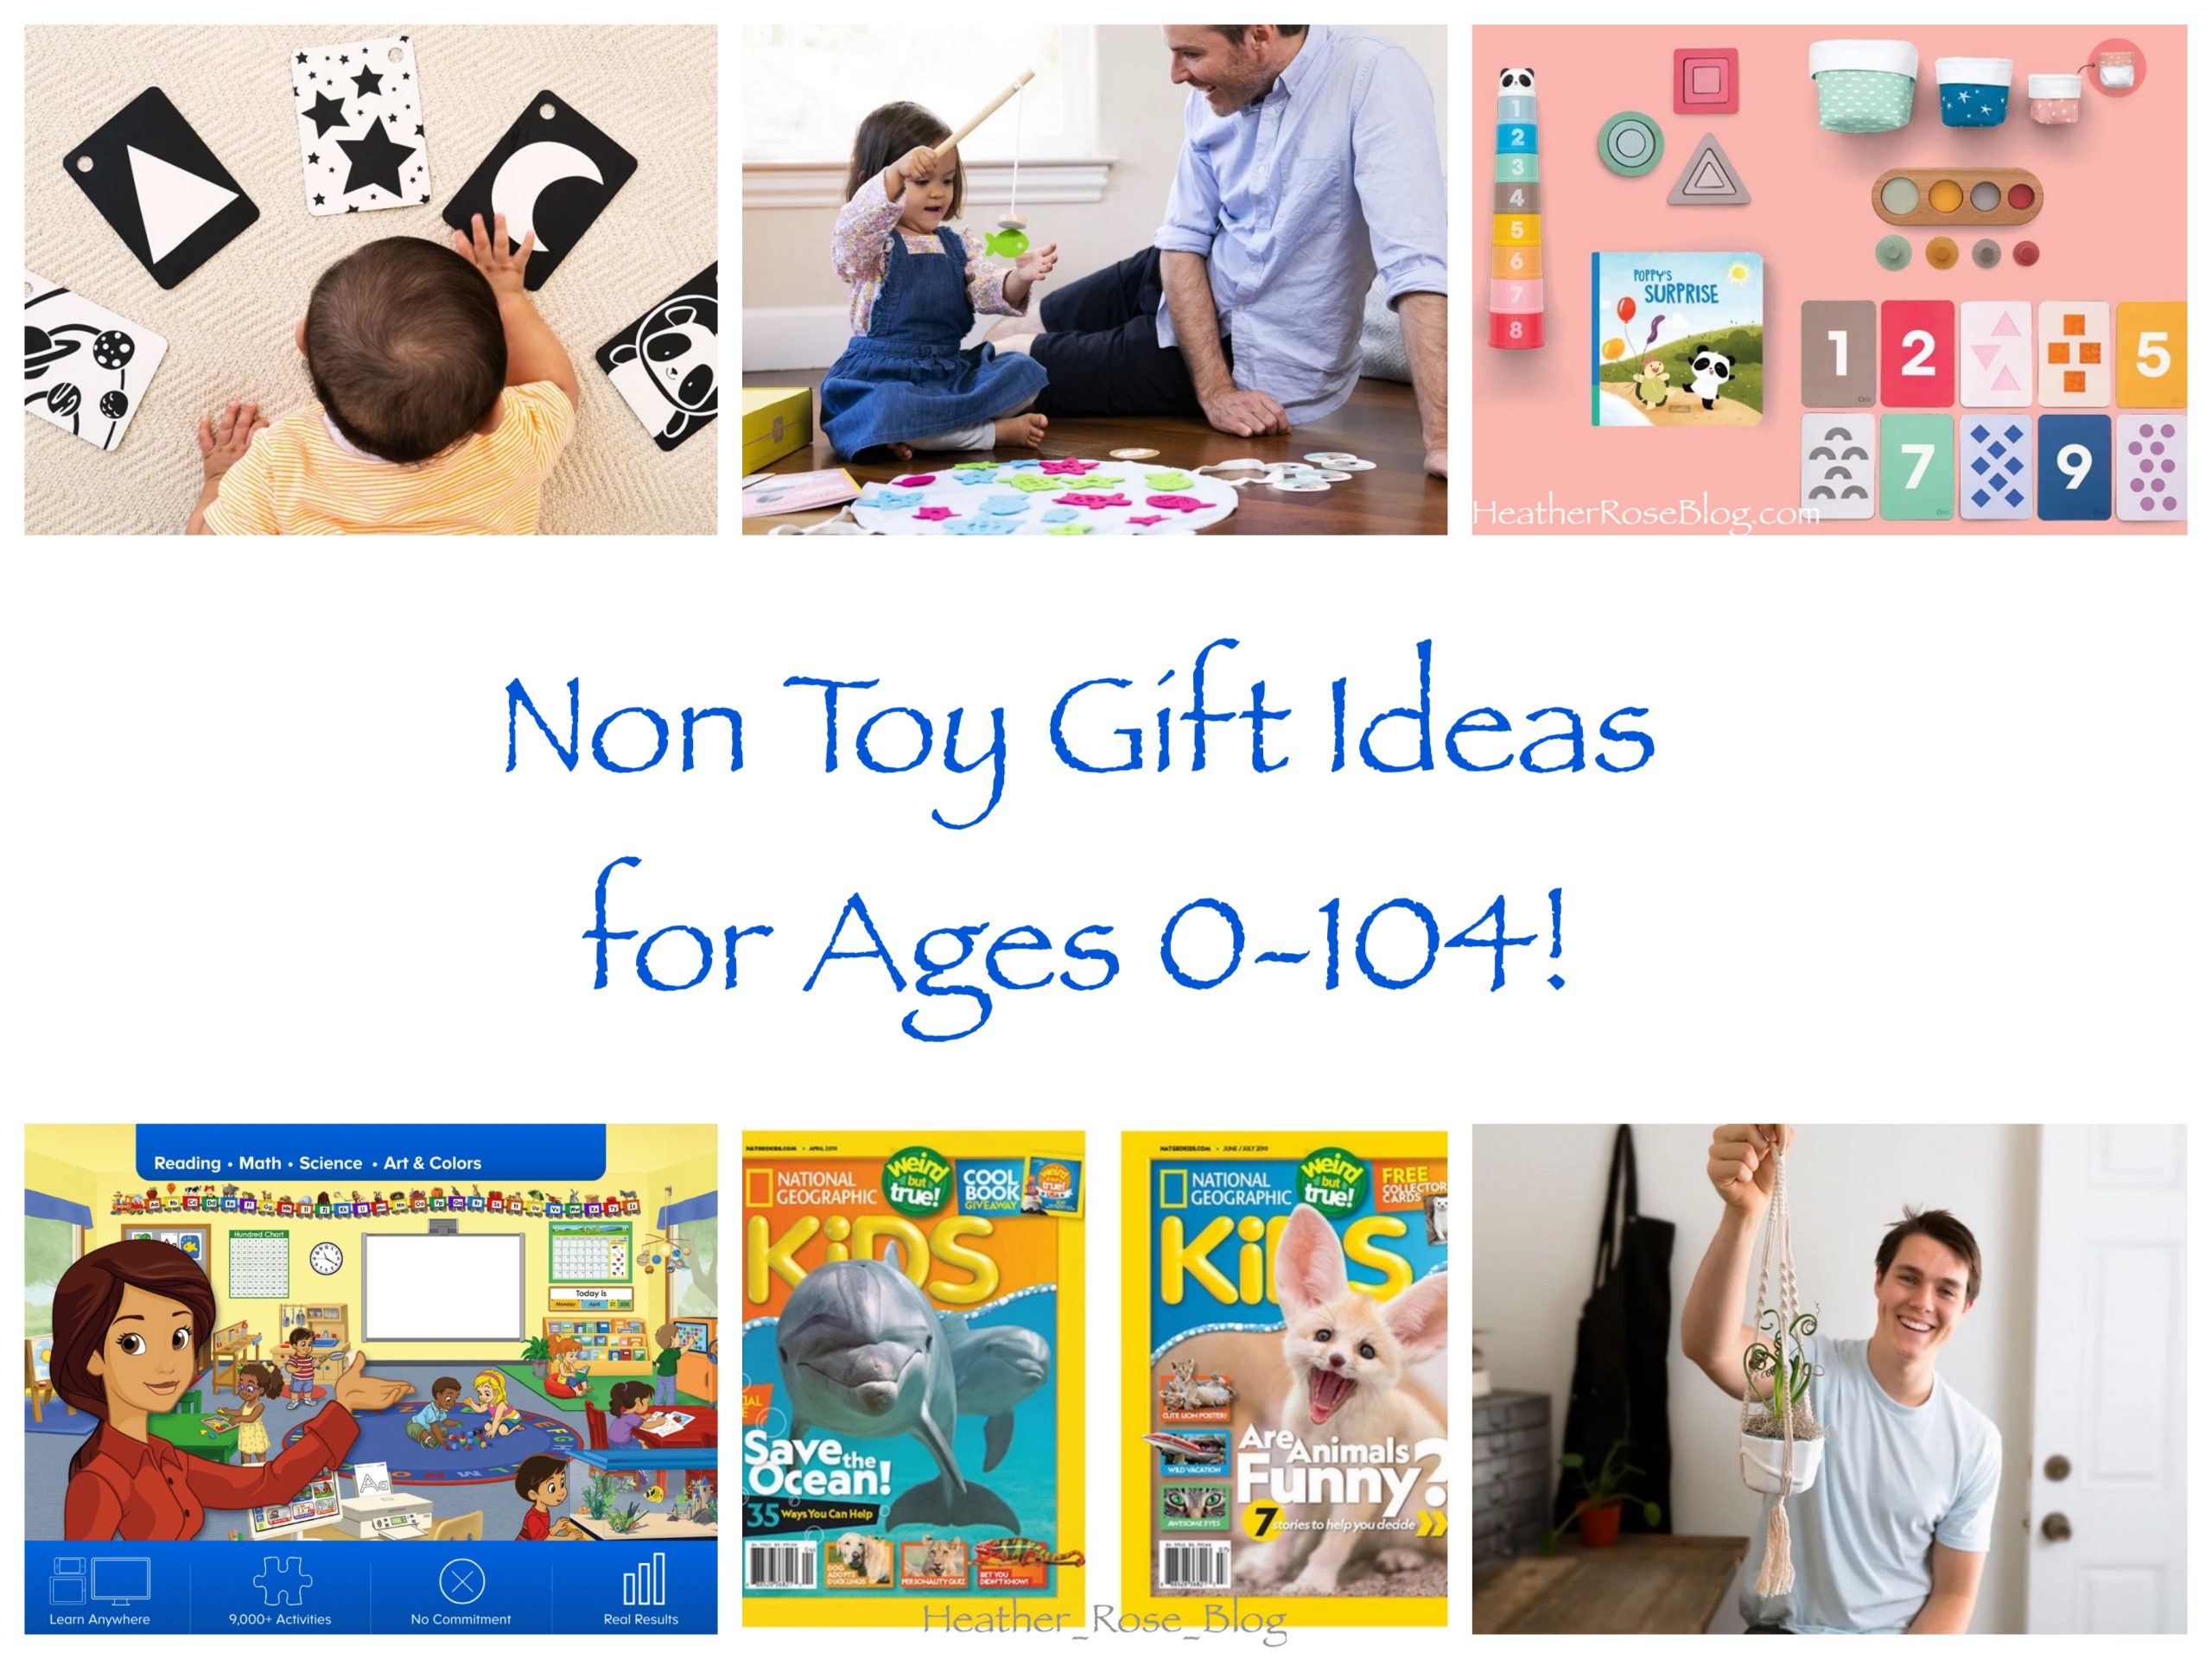 Non toy gift ideas for ages 0-104